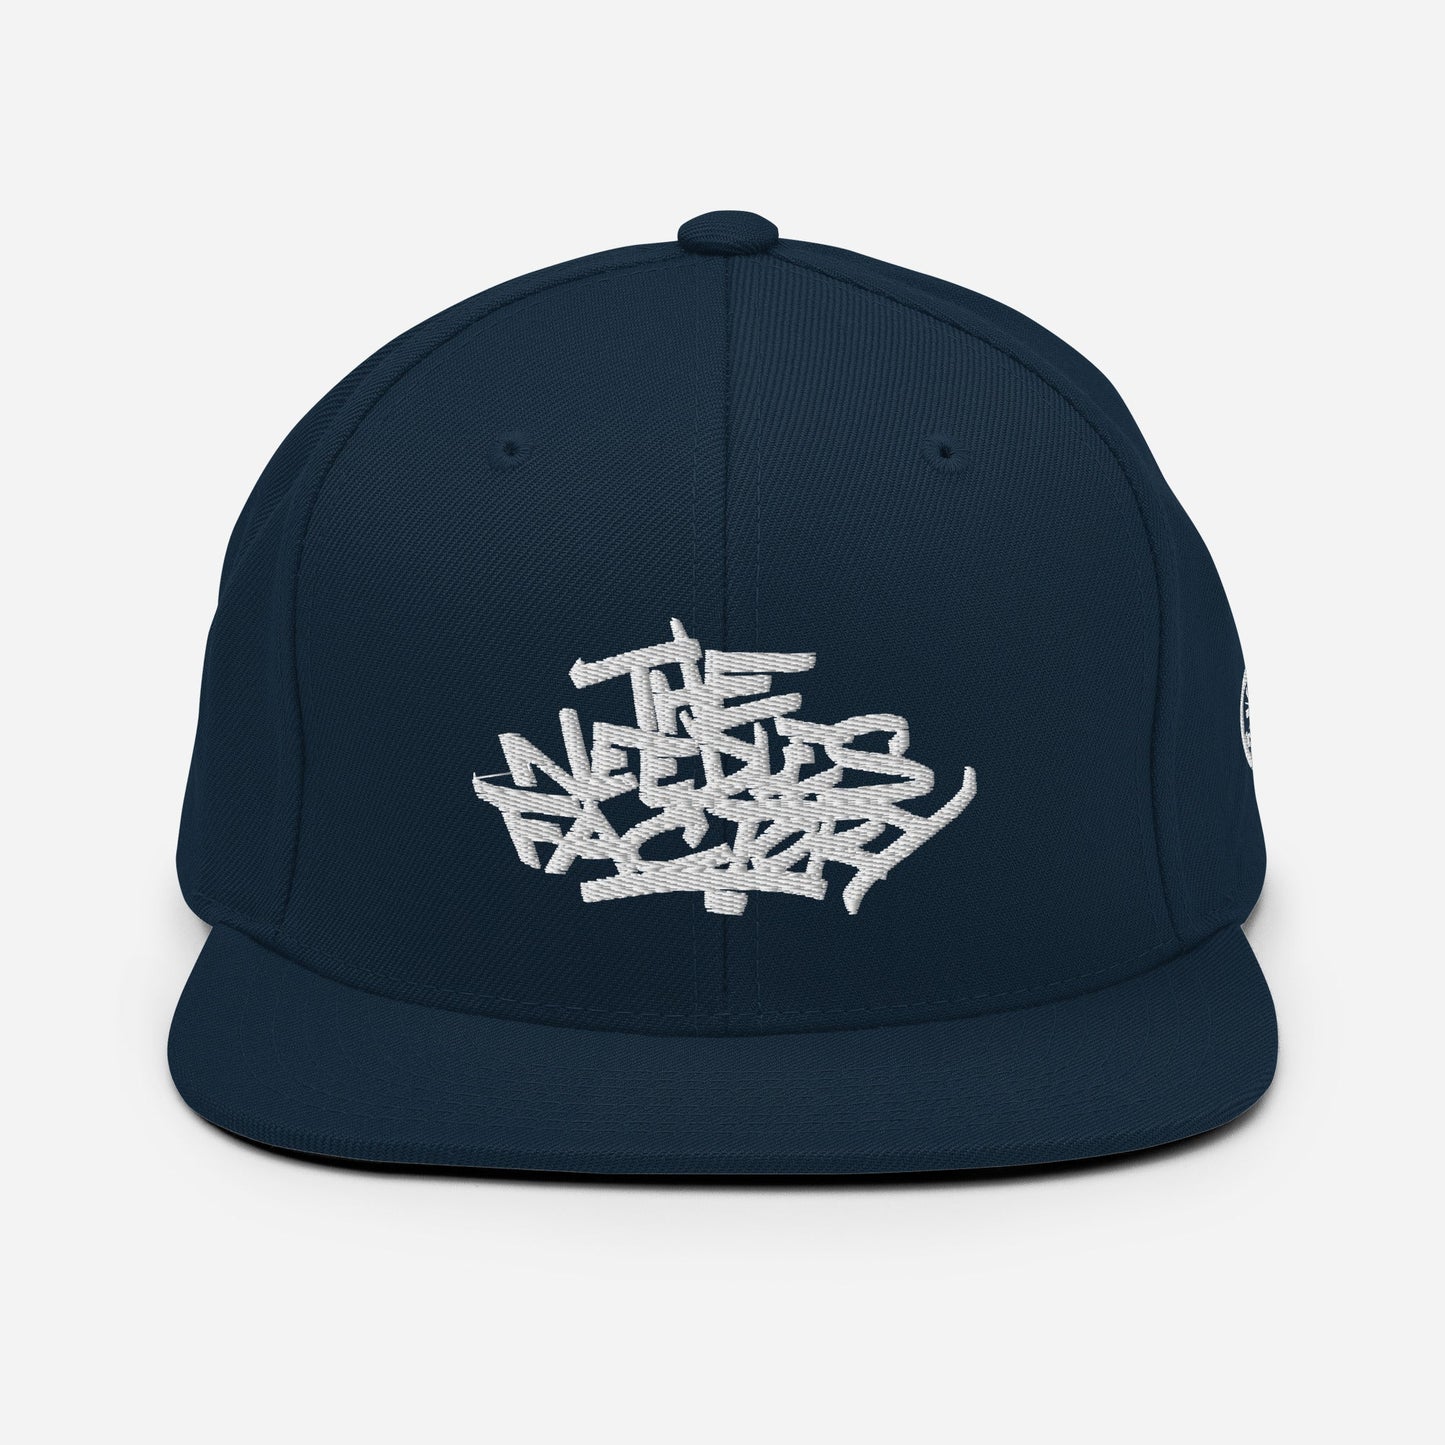 Casquette Snapback Brodé blanc Lettring The Needles Factory Free Shipping - The Needles Factory